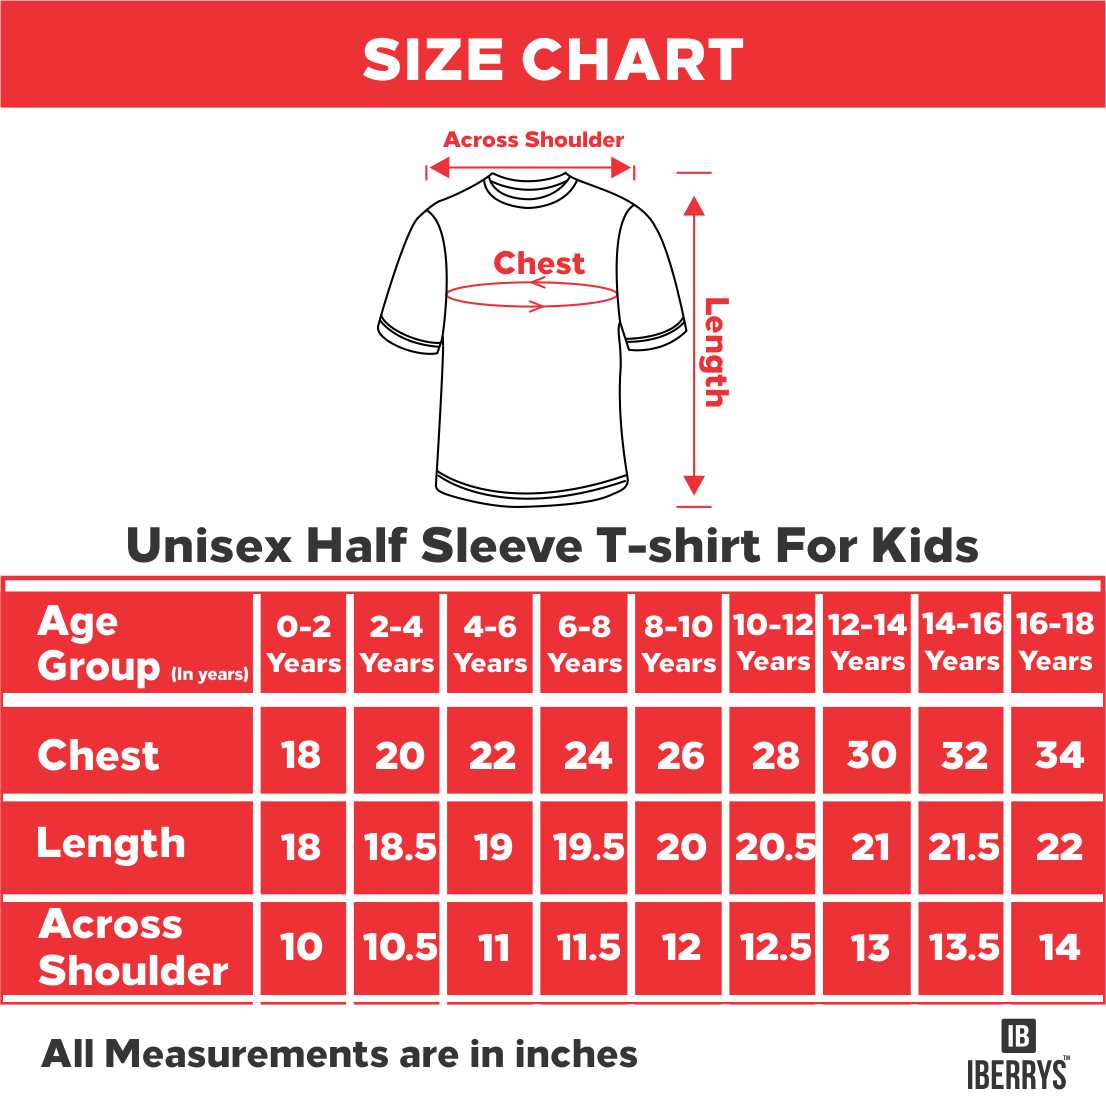 Lil brother- big sister matching Sibling kids t shirts - white